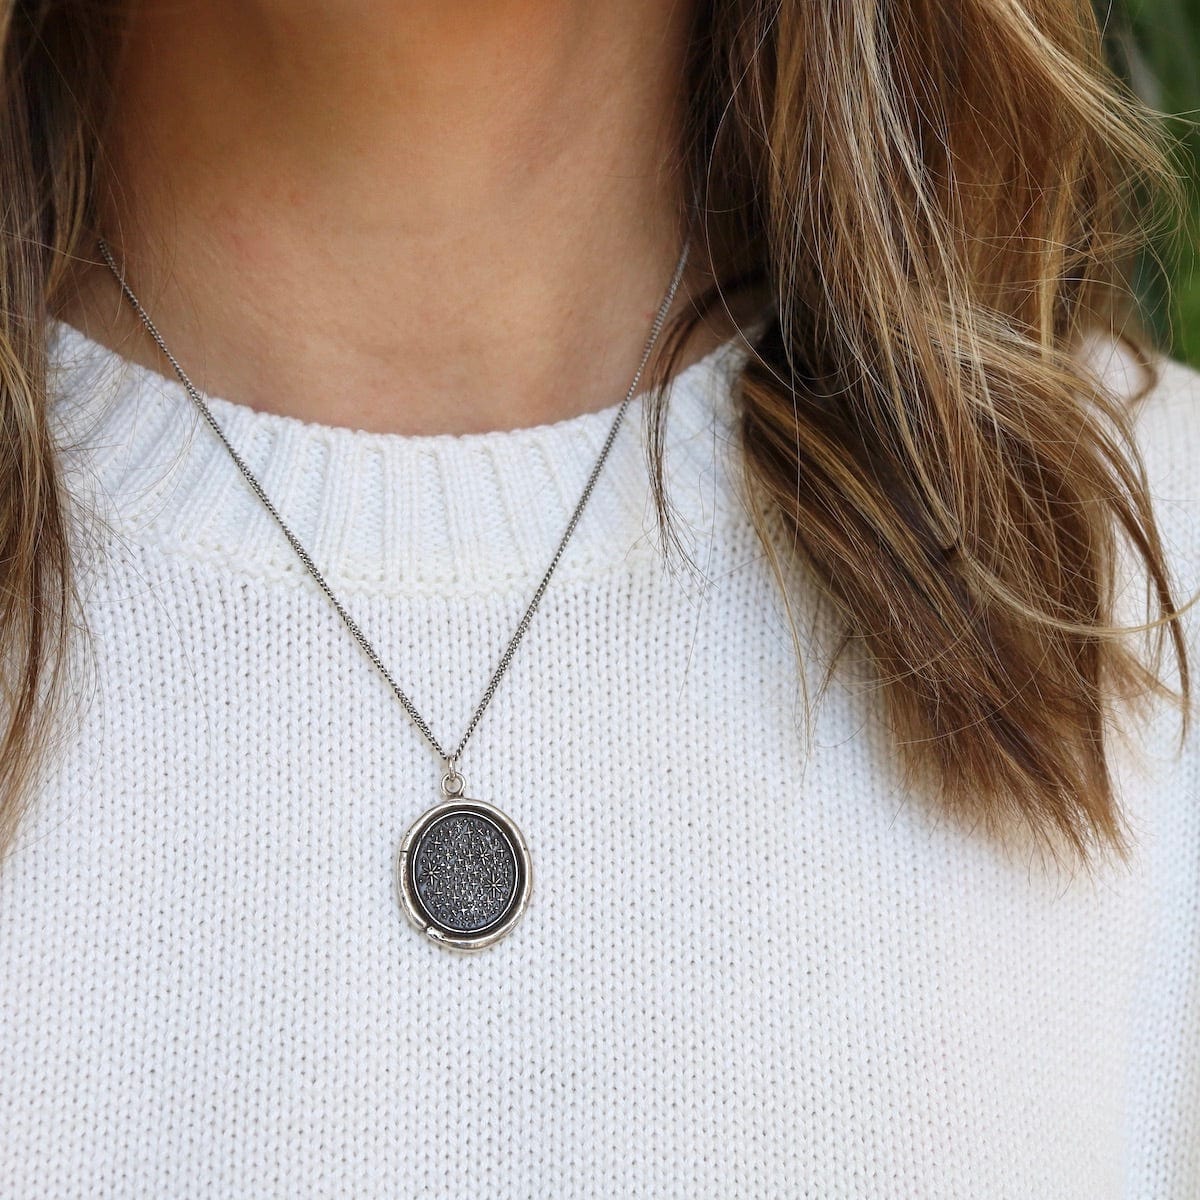 NKL We Are Stardust Talisman Necklace